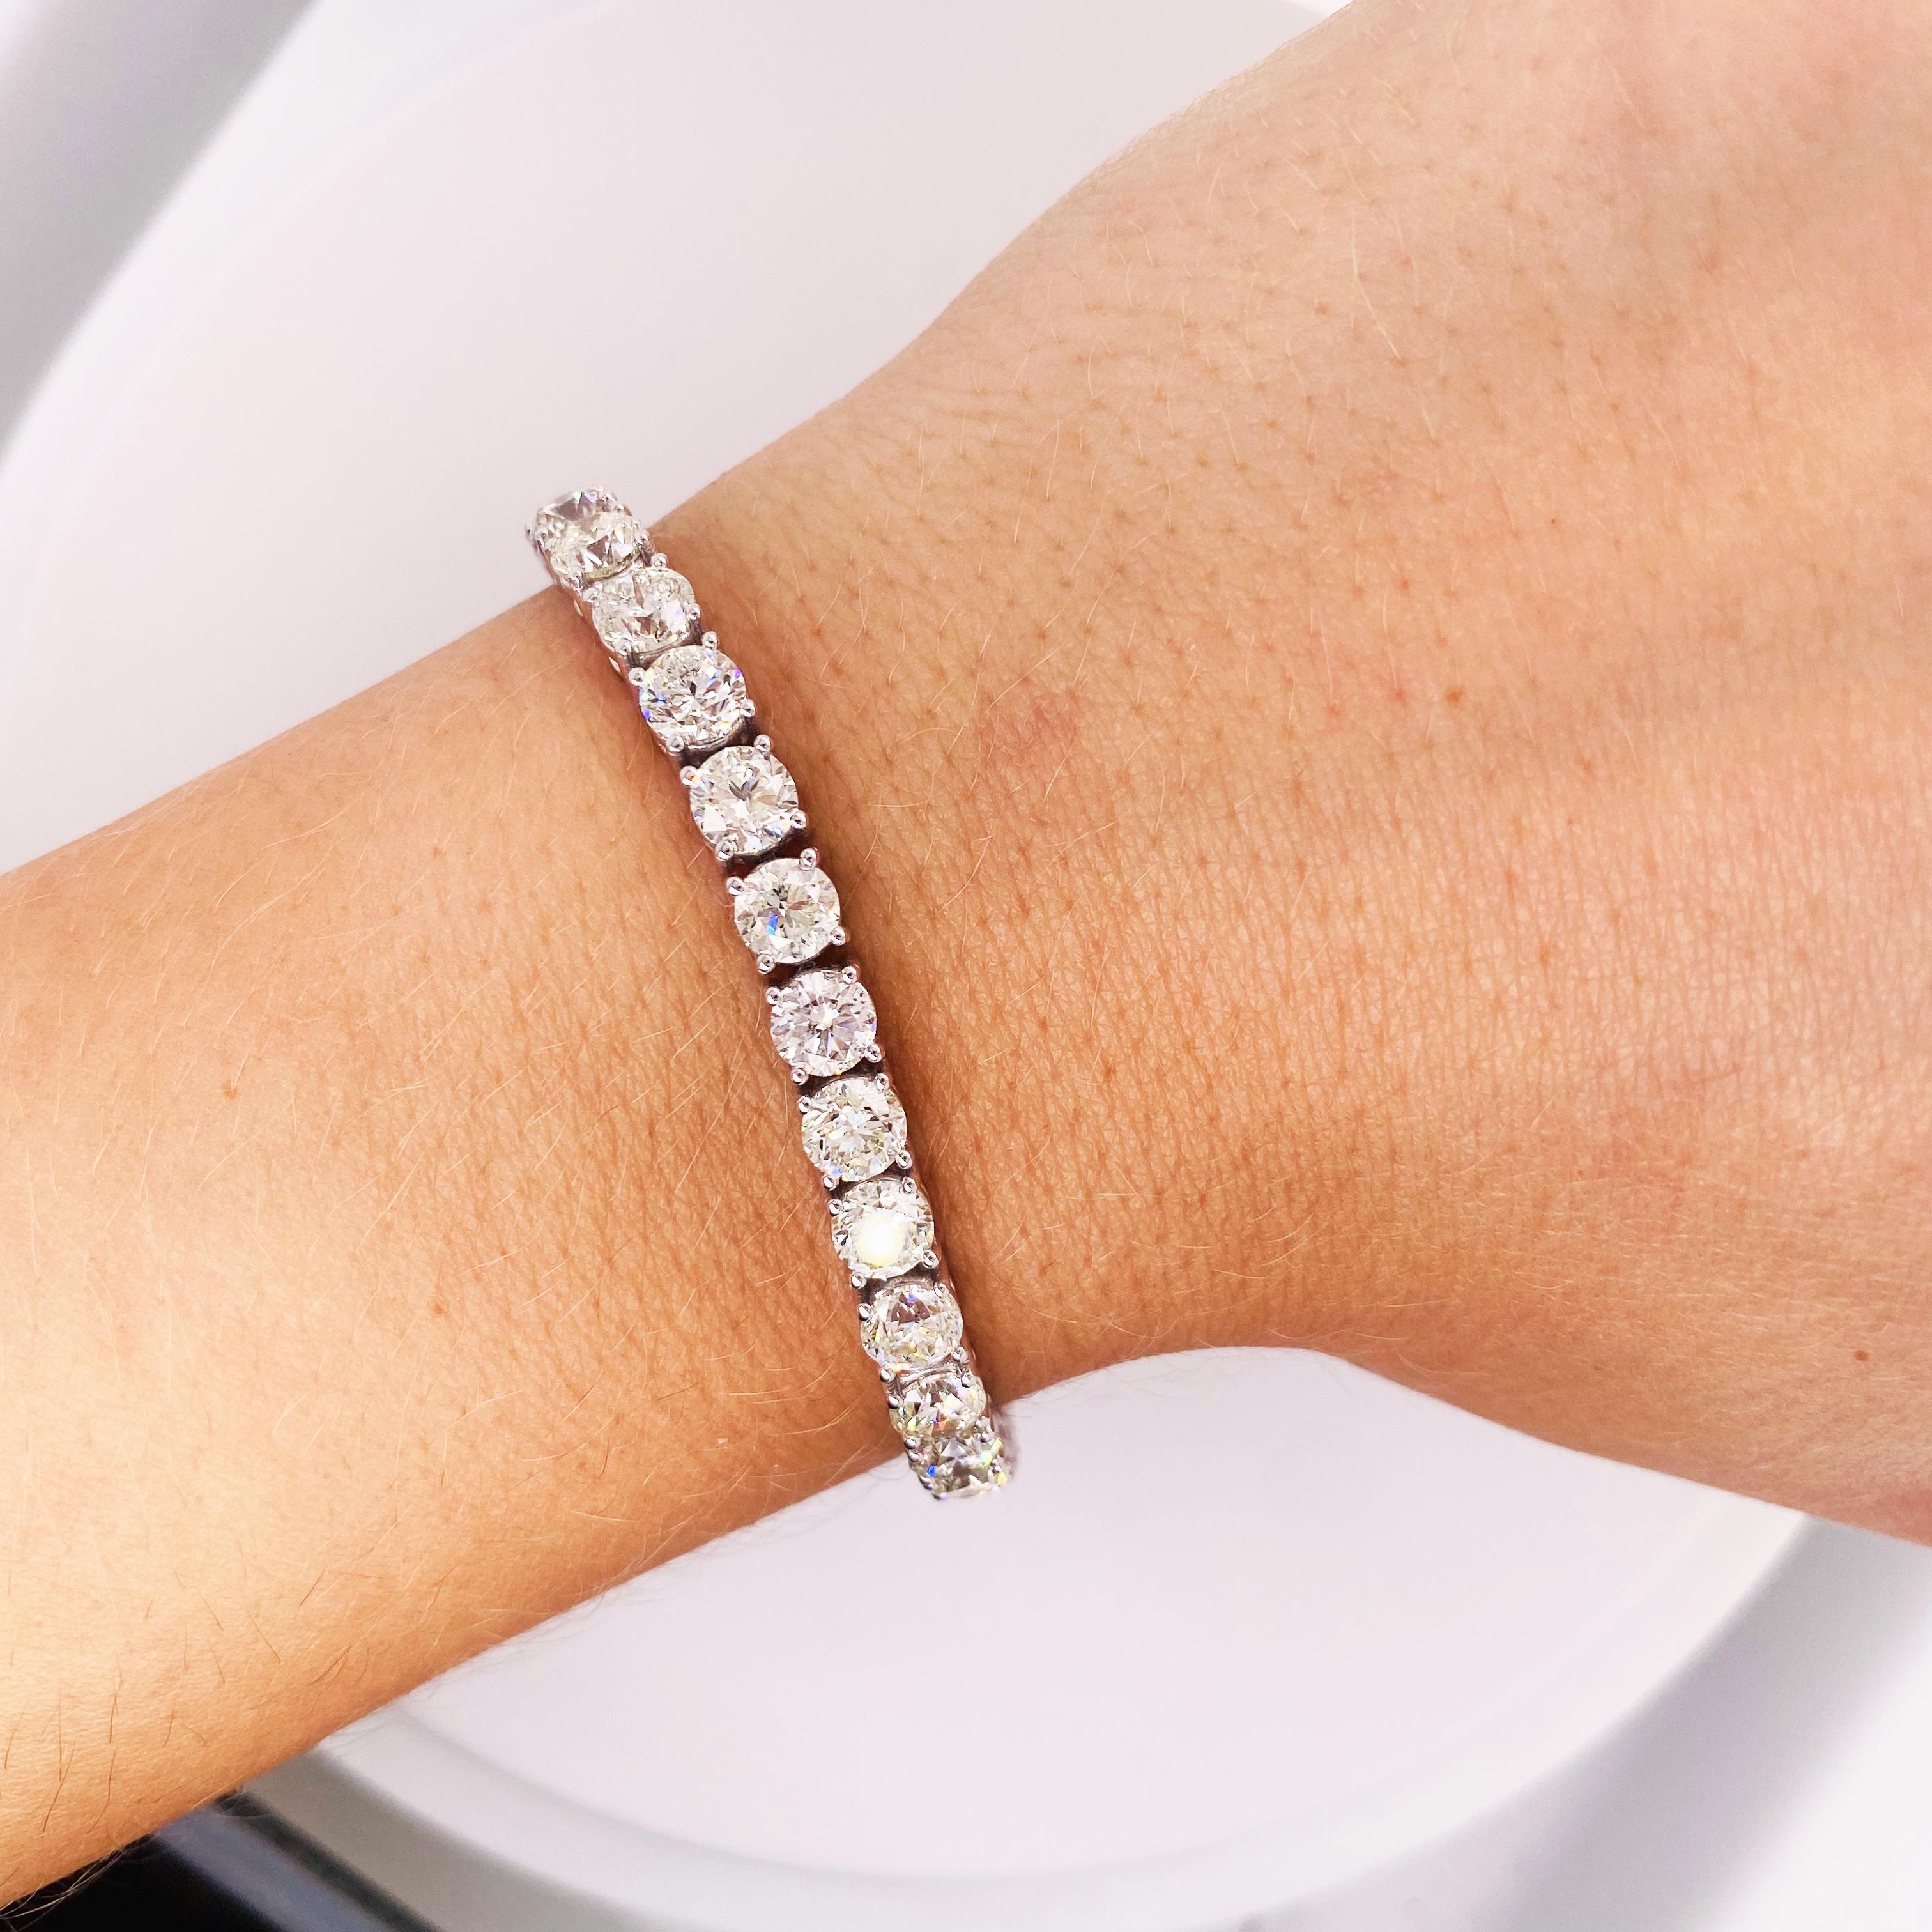 There is a full 17.00 carats of diamonds in this massive tennis bracelet! It is gorgeous for unisex. The diamonds are S!2 clarity and H/I color which is very good quality! The bracelet has extra large diamonds and each diamond is set in a four prong